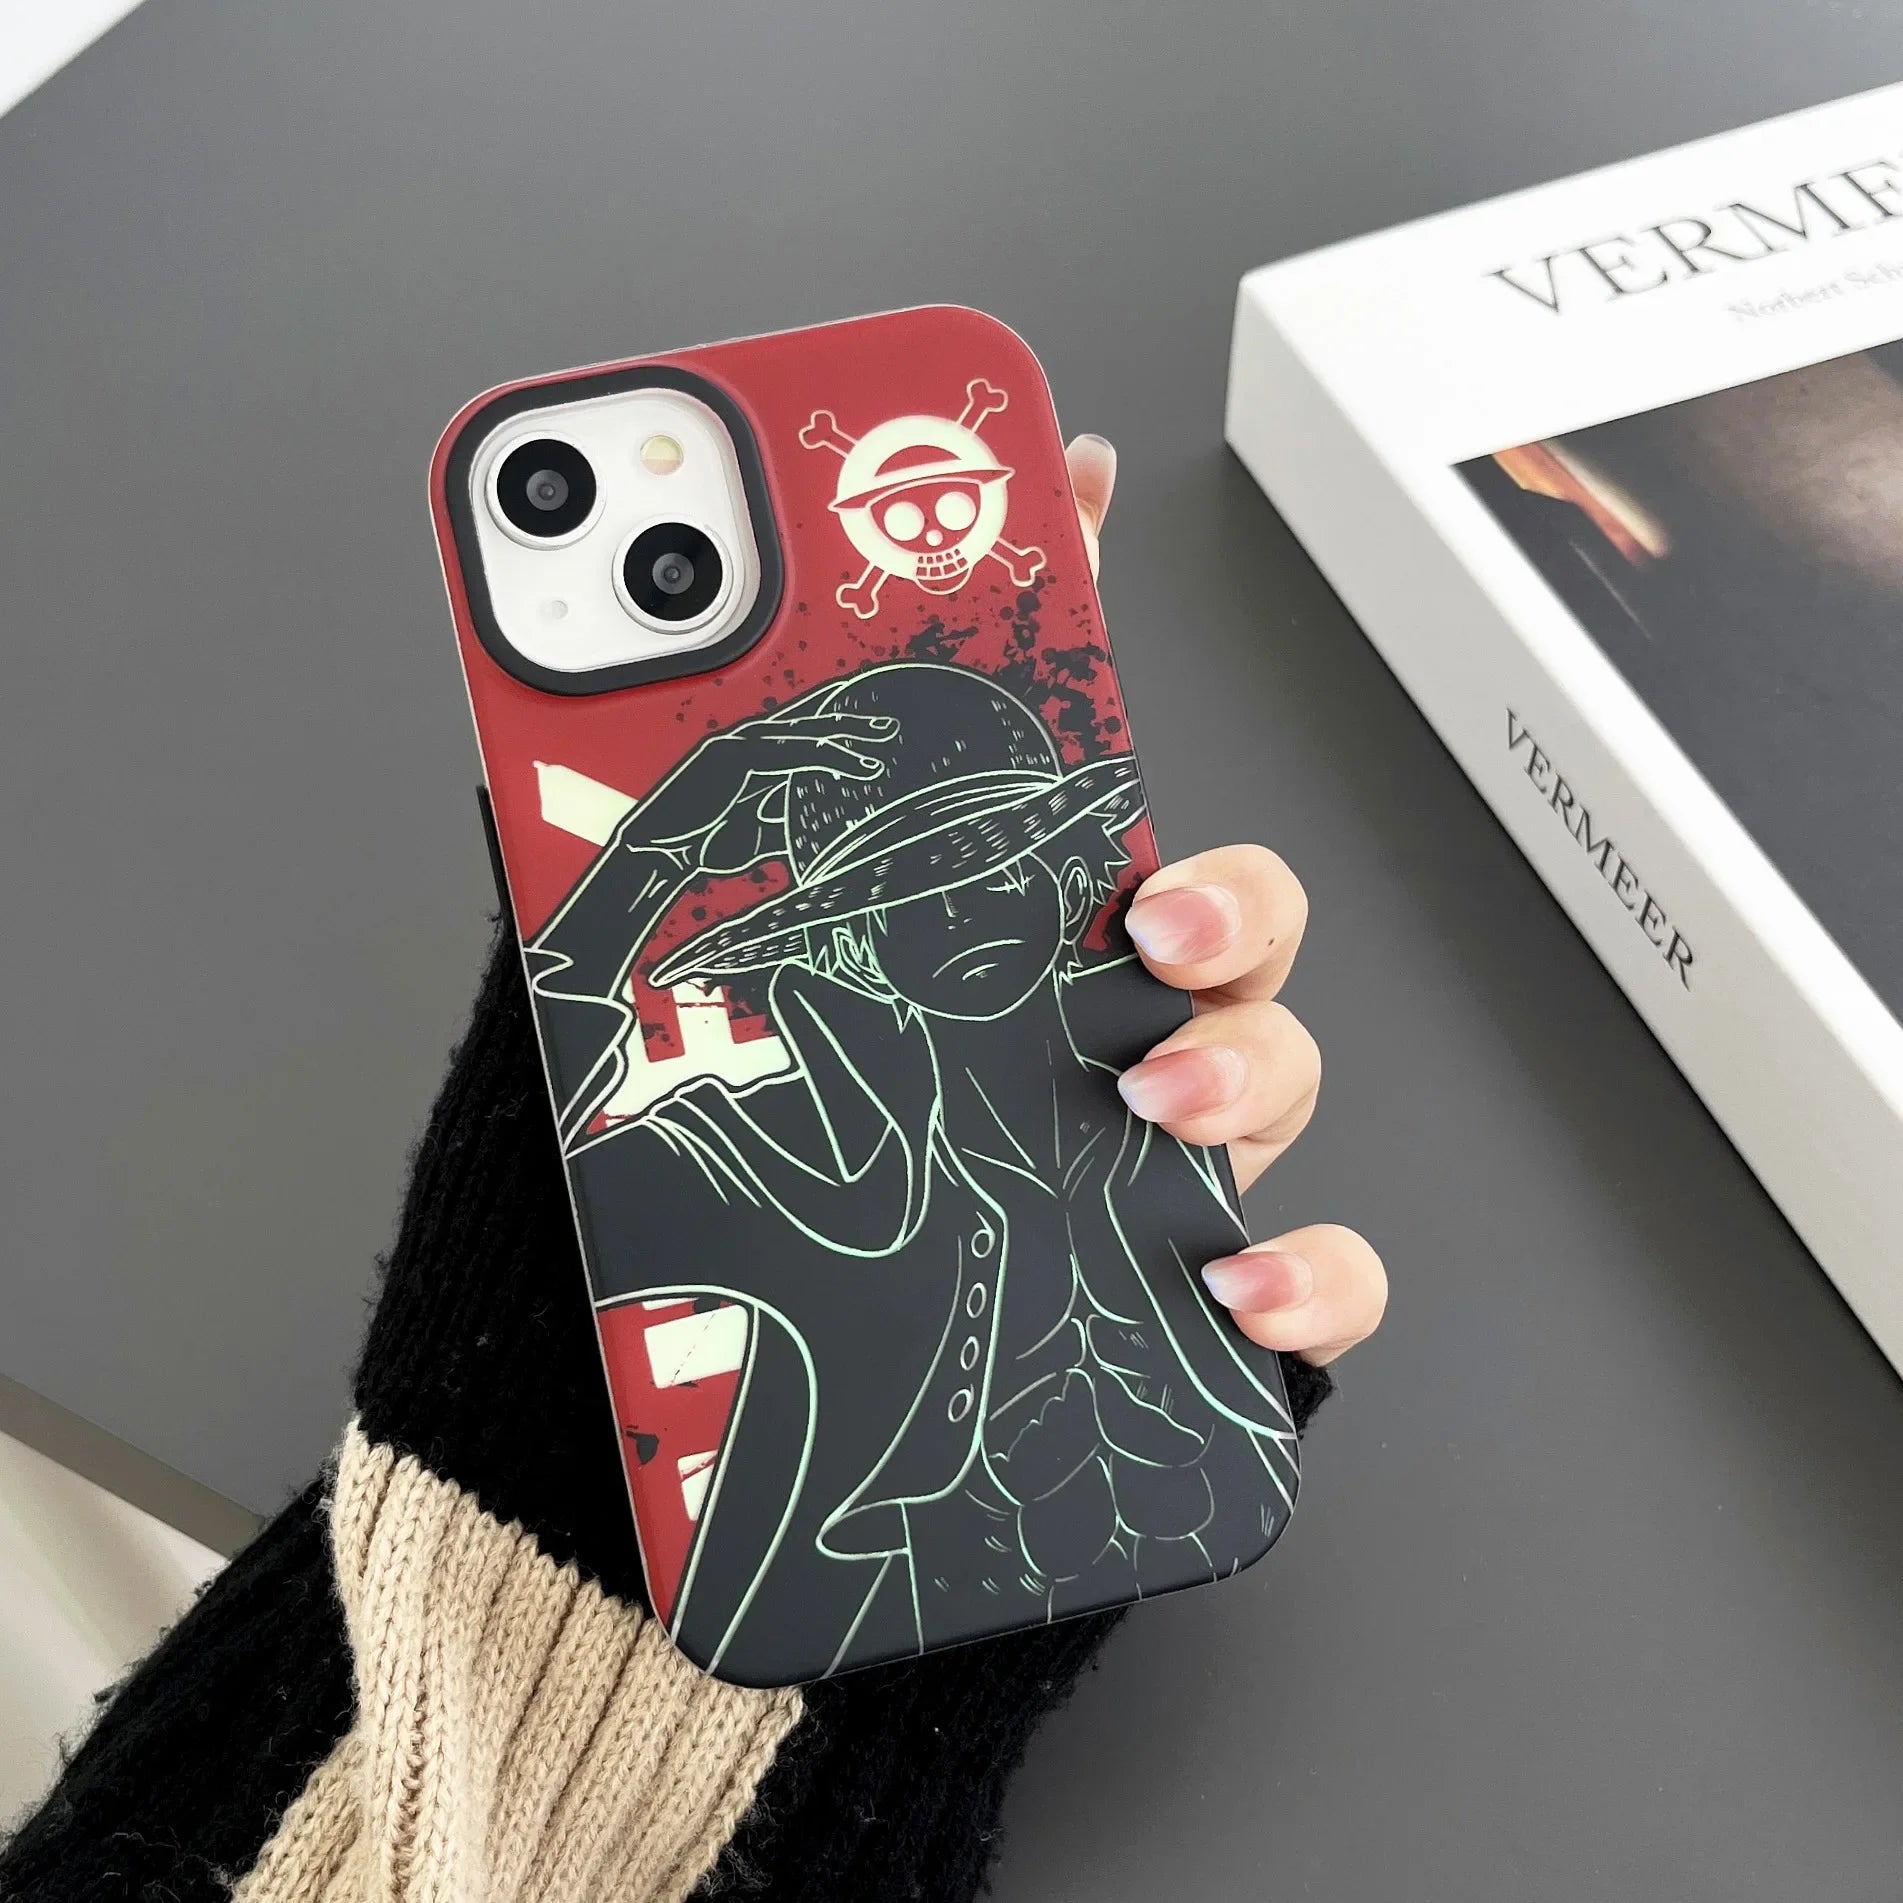 Phone Case For iPhone - 0n3 P13c3 Edition - more cover inside